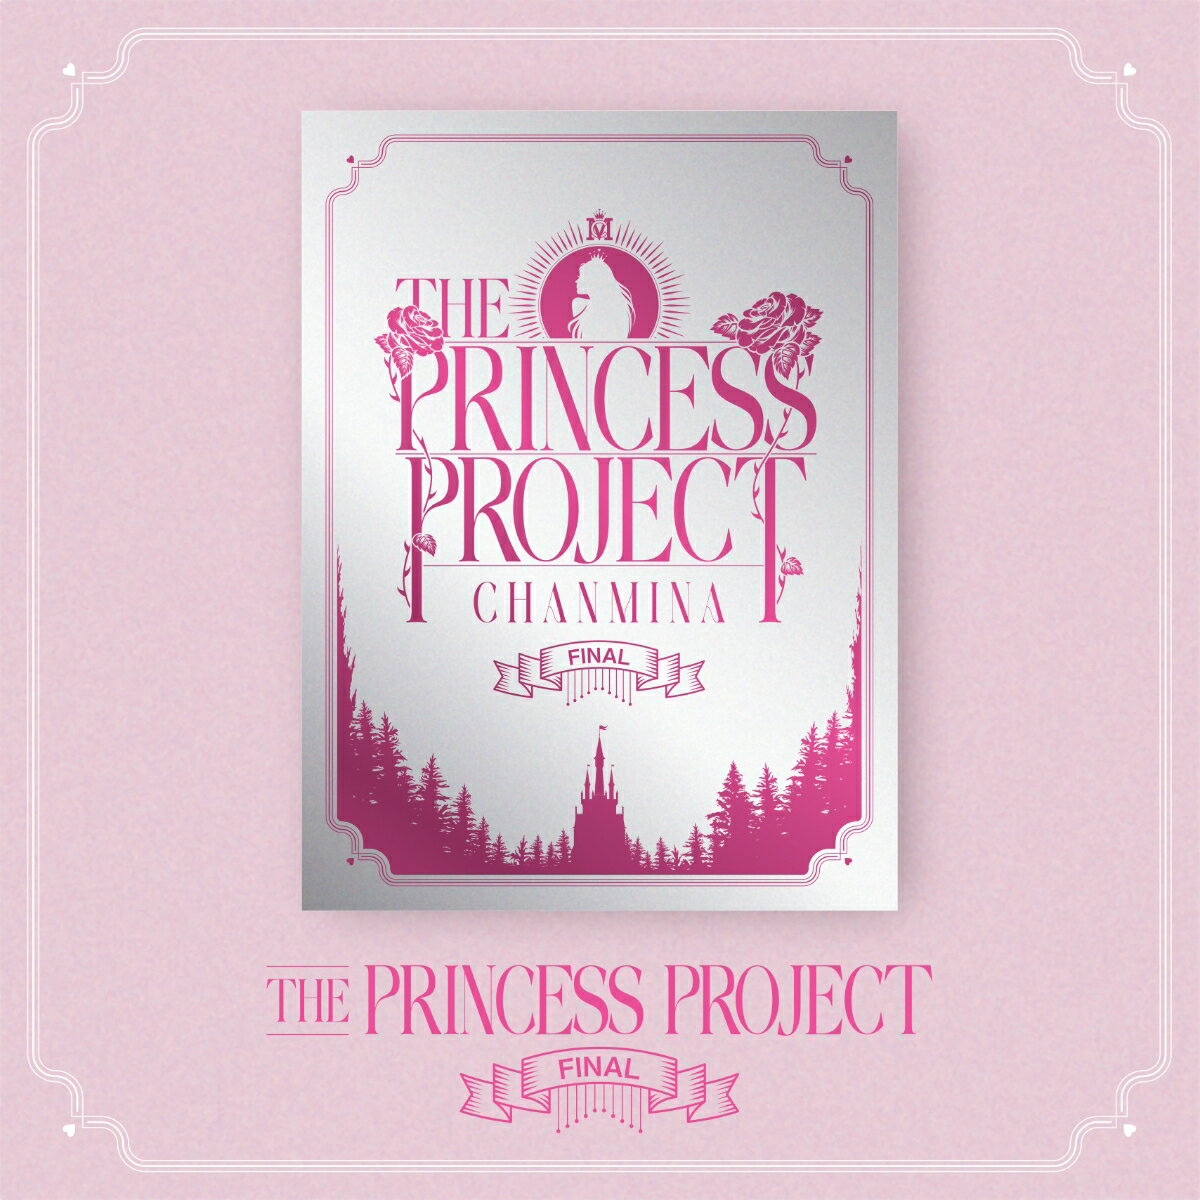 THE PRINCESS PROJECT - FINAL -(1DVD) ちゃんみな